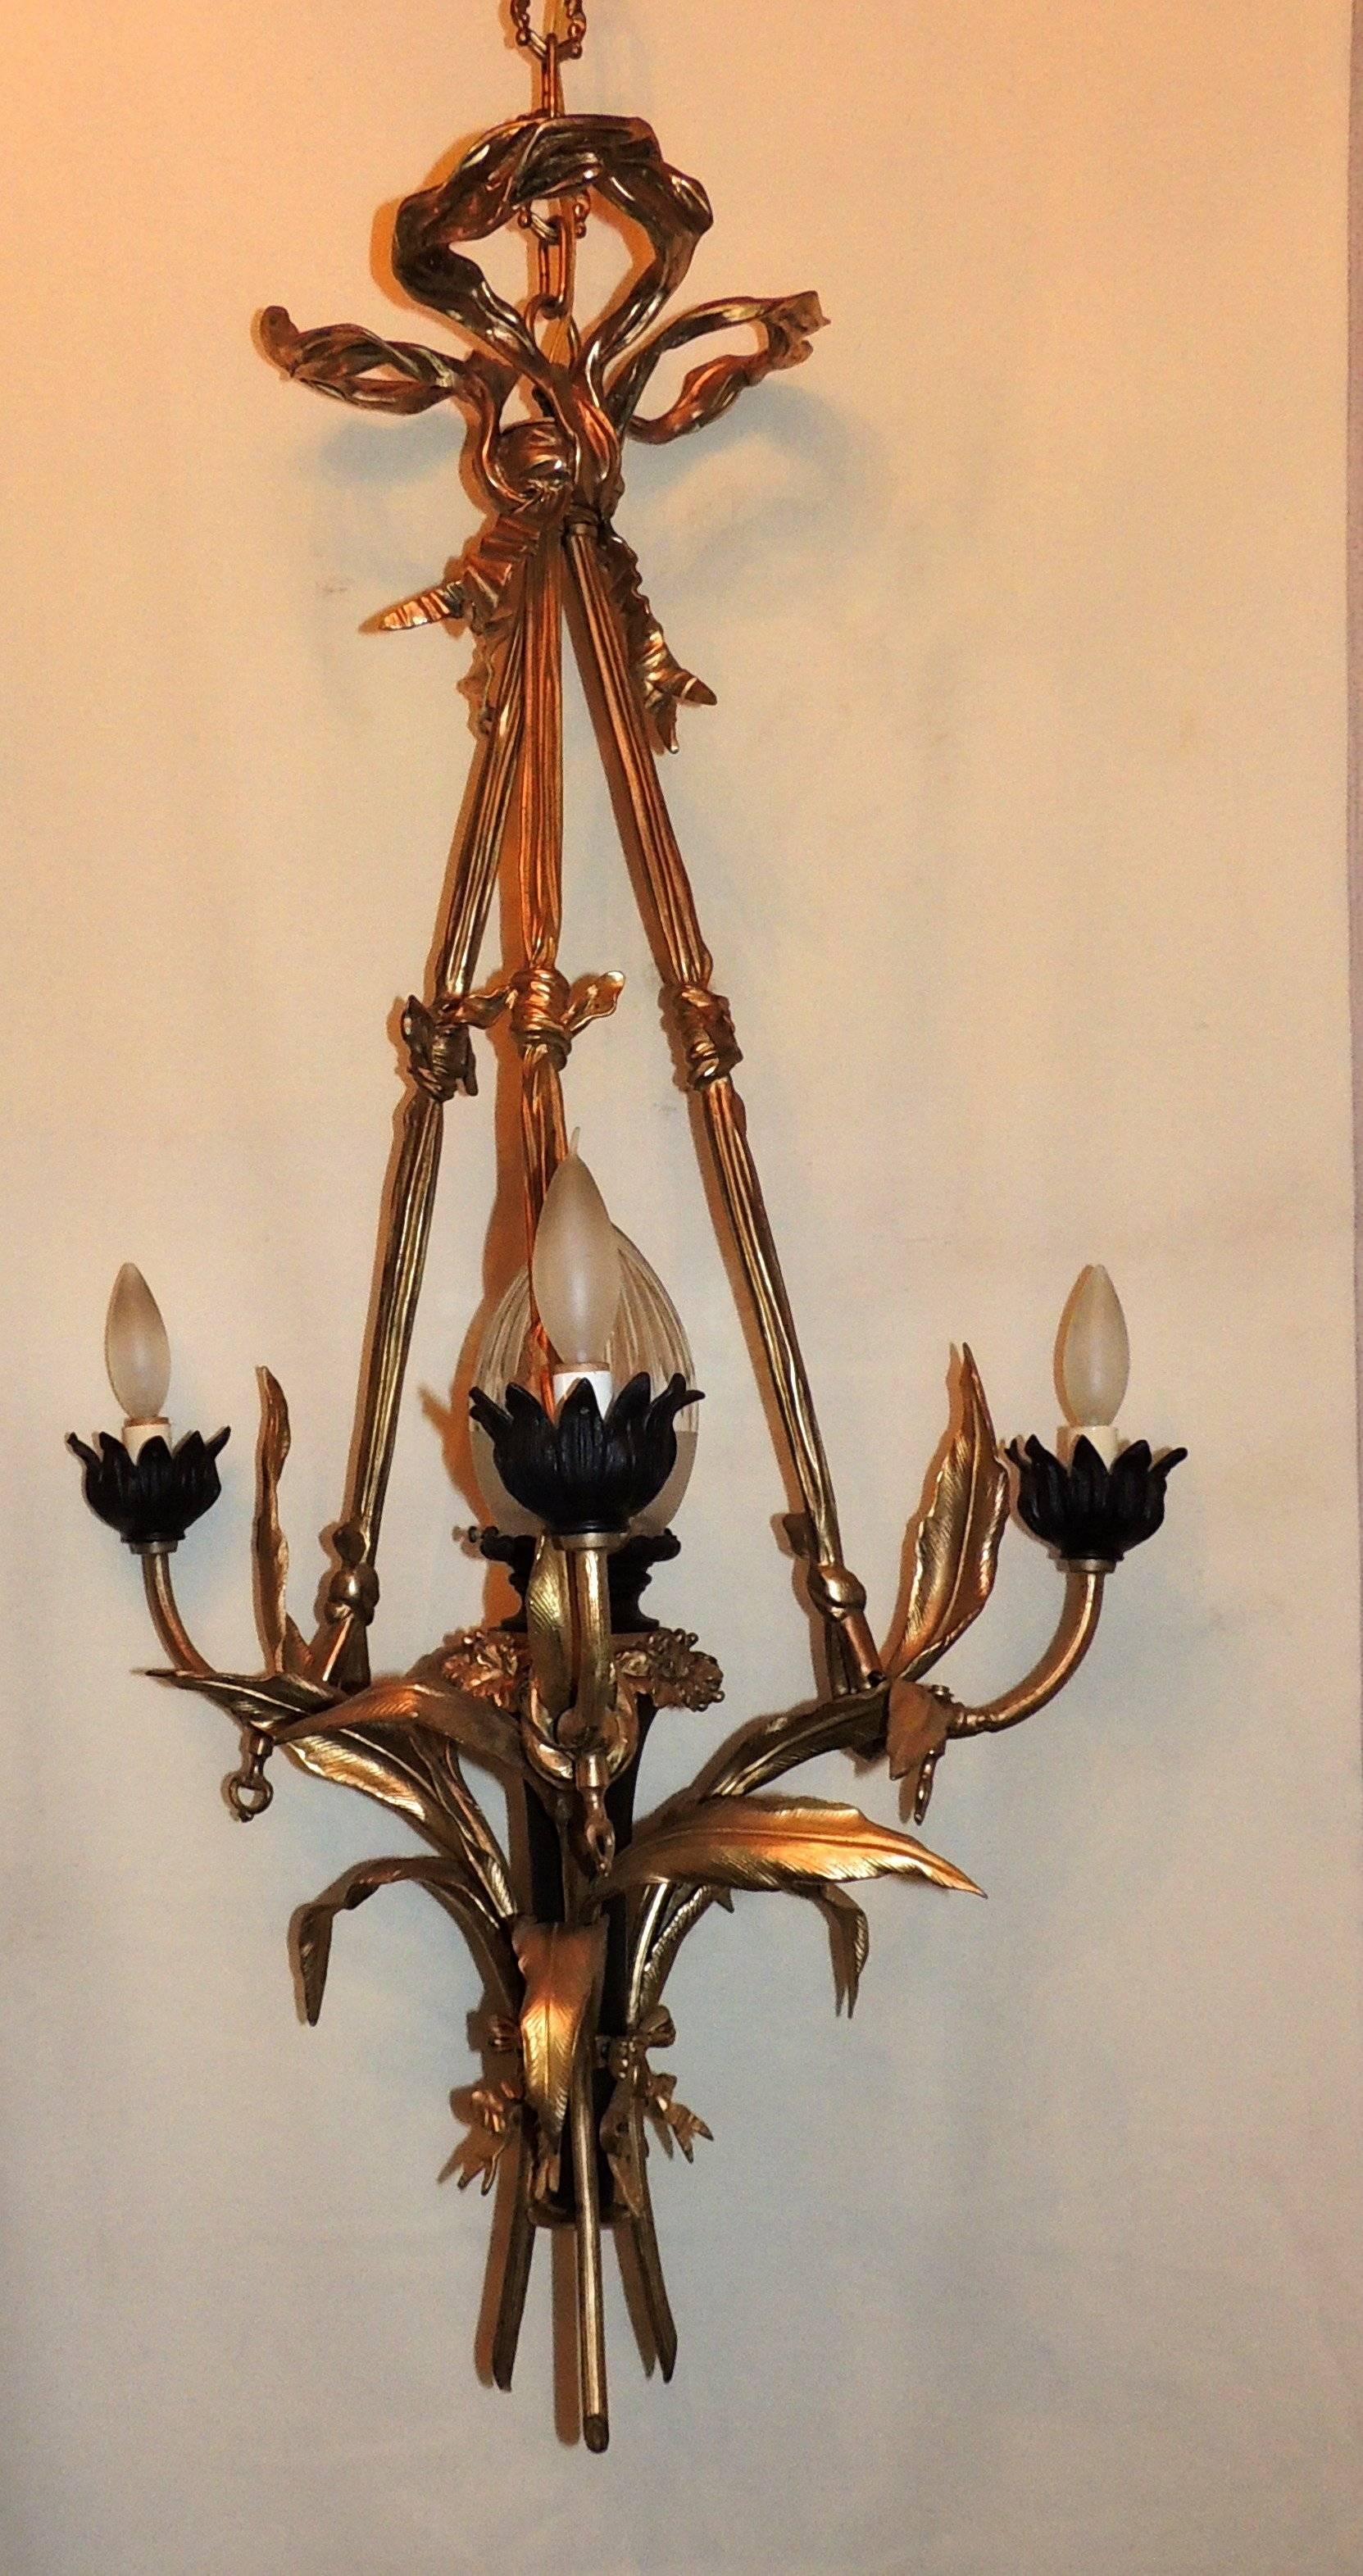 A wonderful French gilt doré and patina bronze bow top neoclassical fixture centered by a crystal shade and three lights surrounding this beautiful chandelier.

Measures: 40